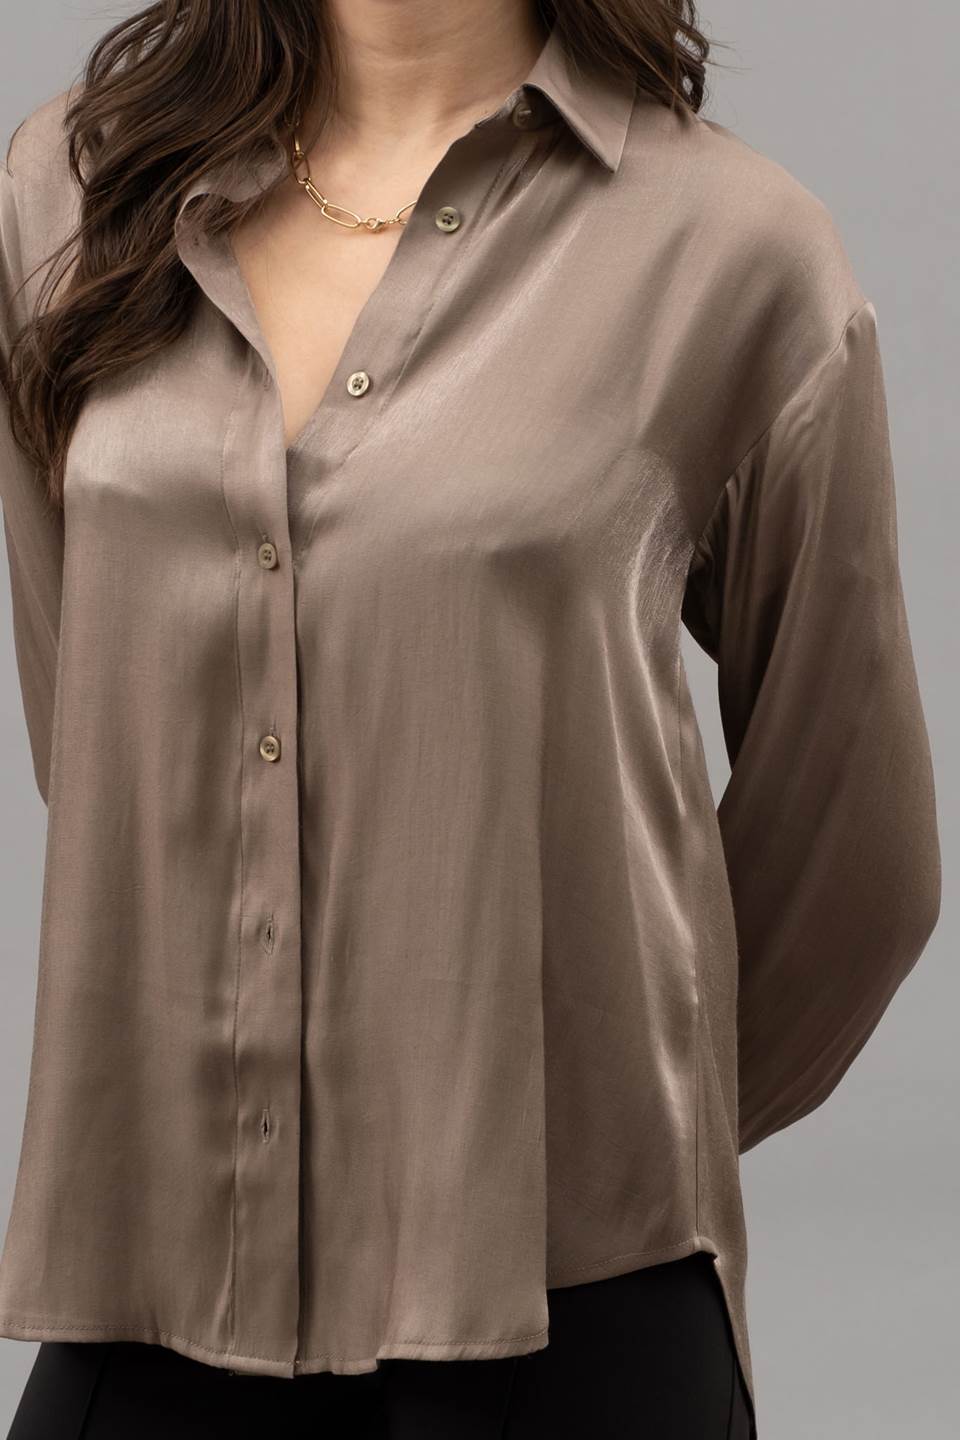 SOLID SATIN BUTTON UP WOVEN TOP